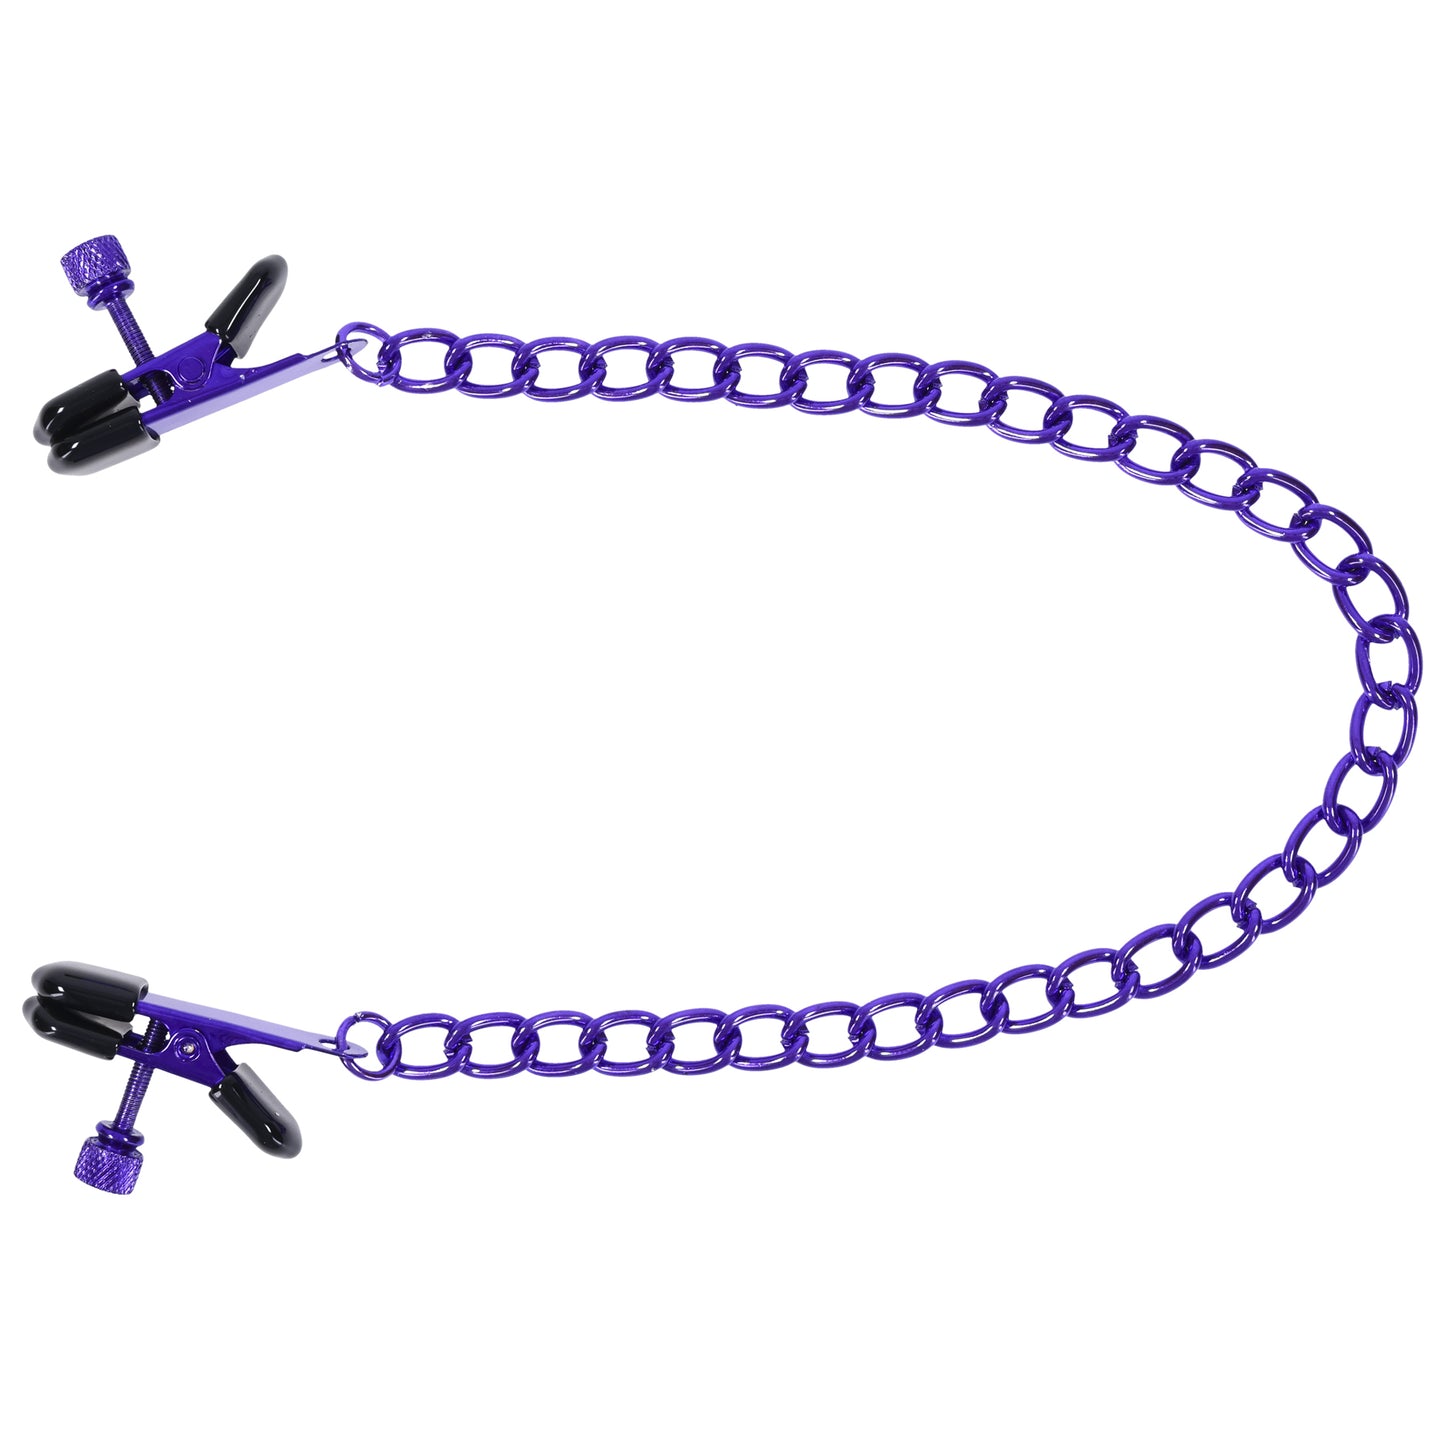 Merci - Chained Up - Nipple Clamps - Violet/black